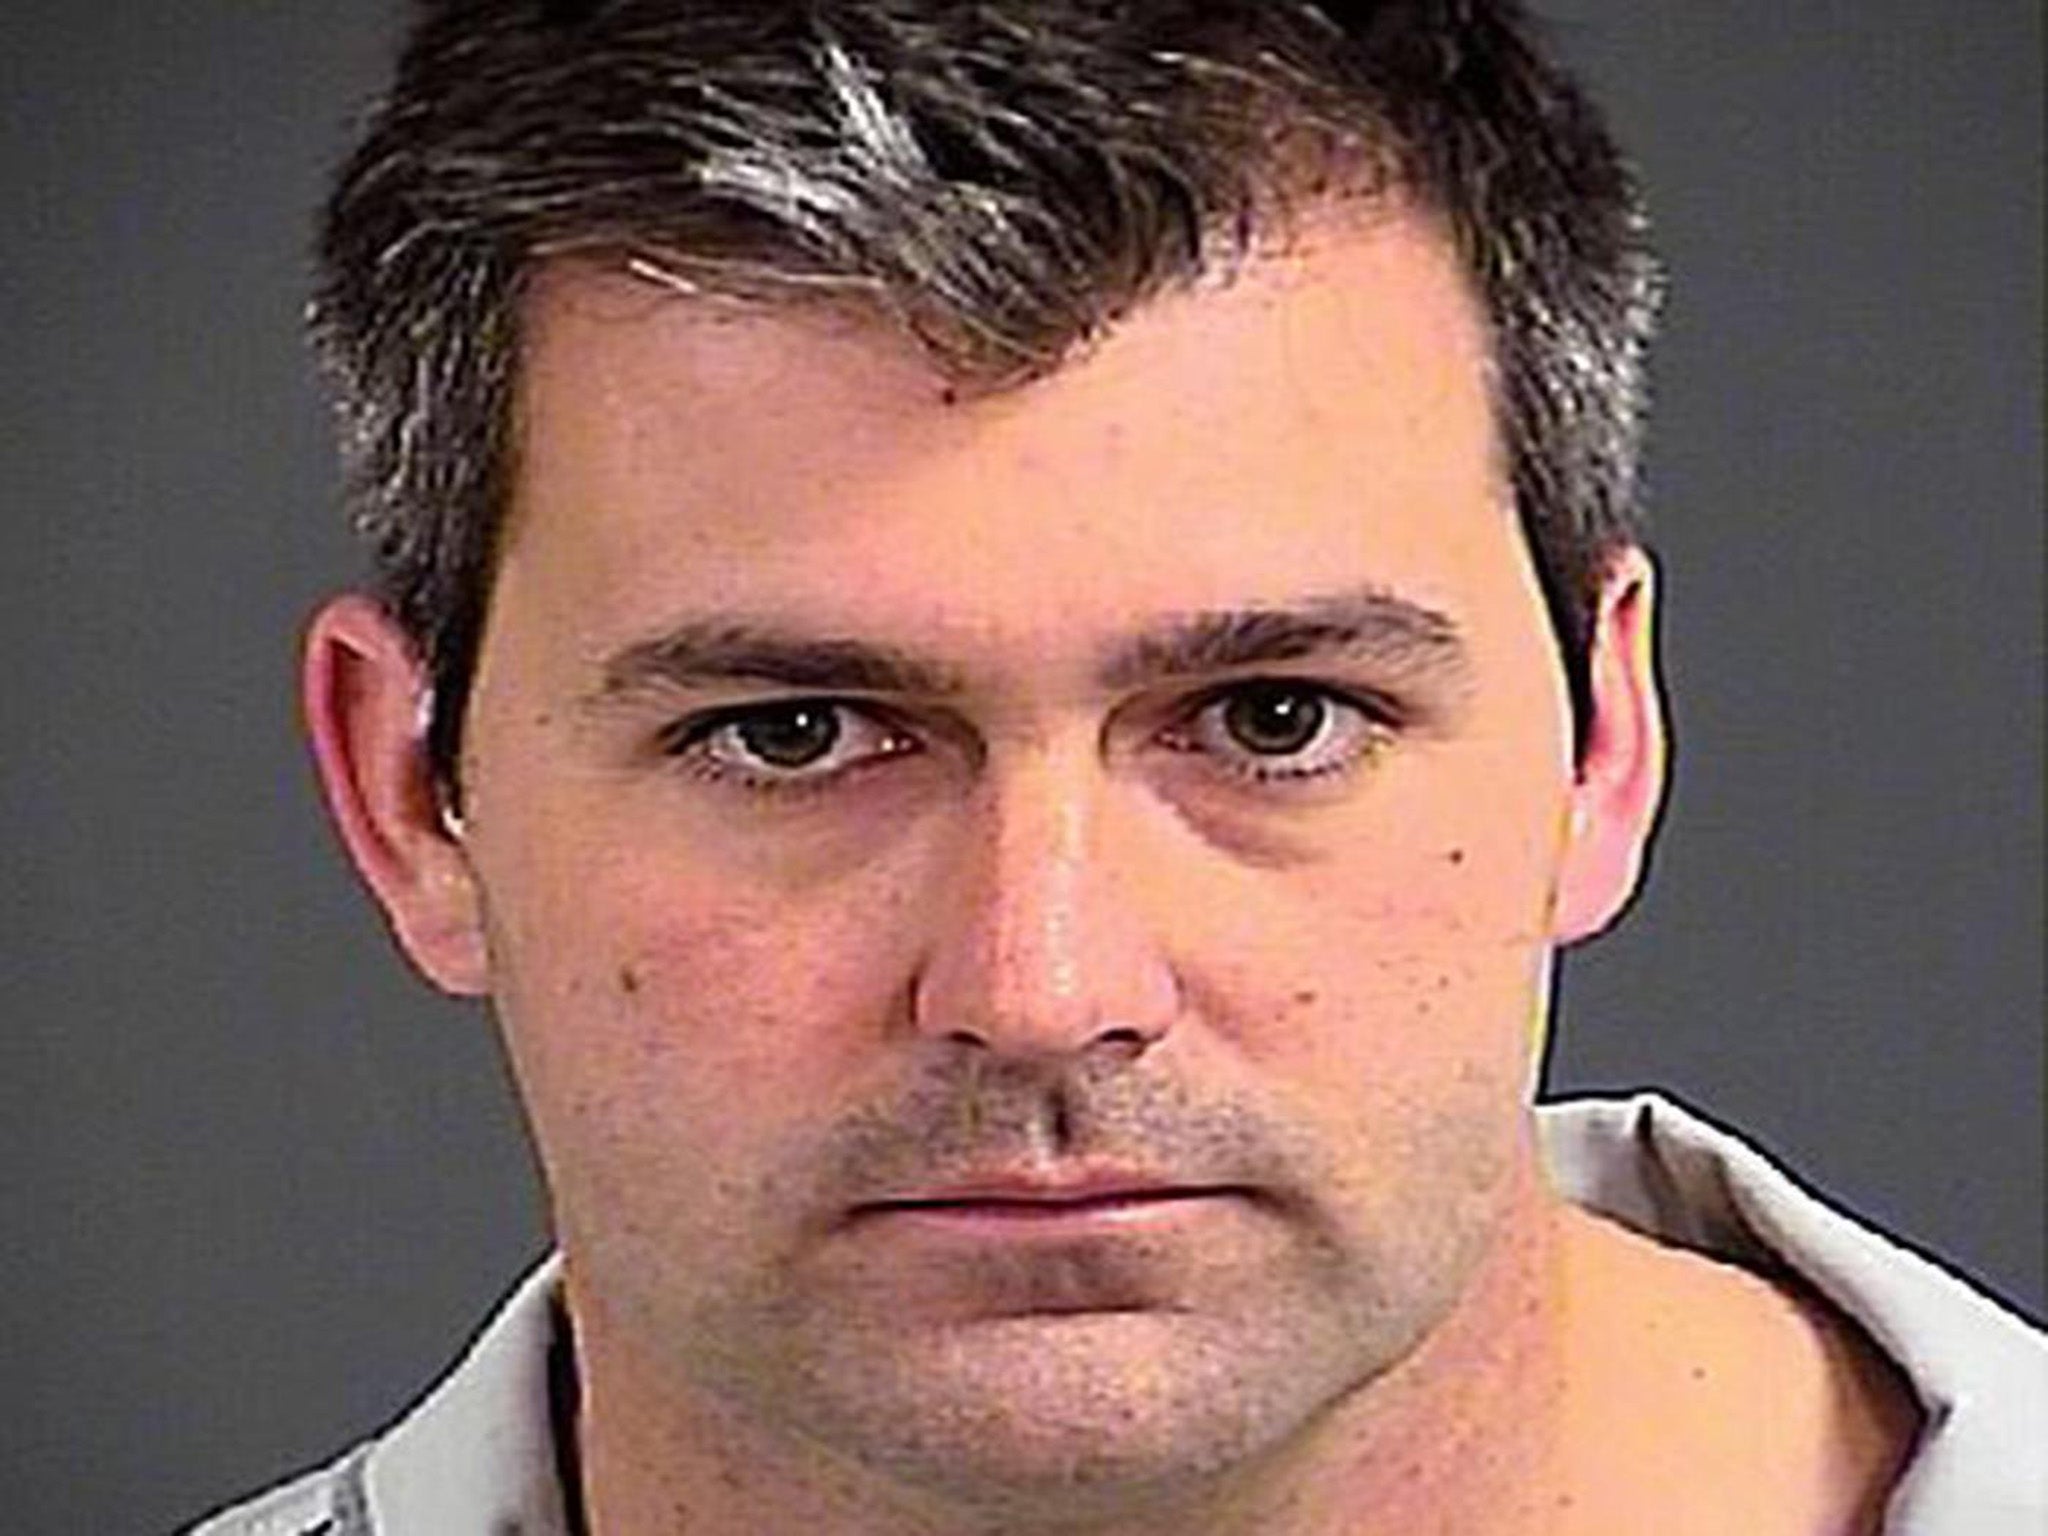 Picture of Michael Slager the policeman accused of using Taser on Wilson